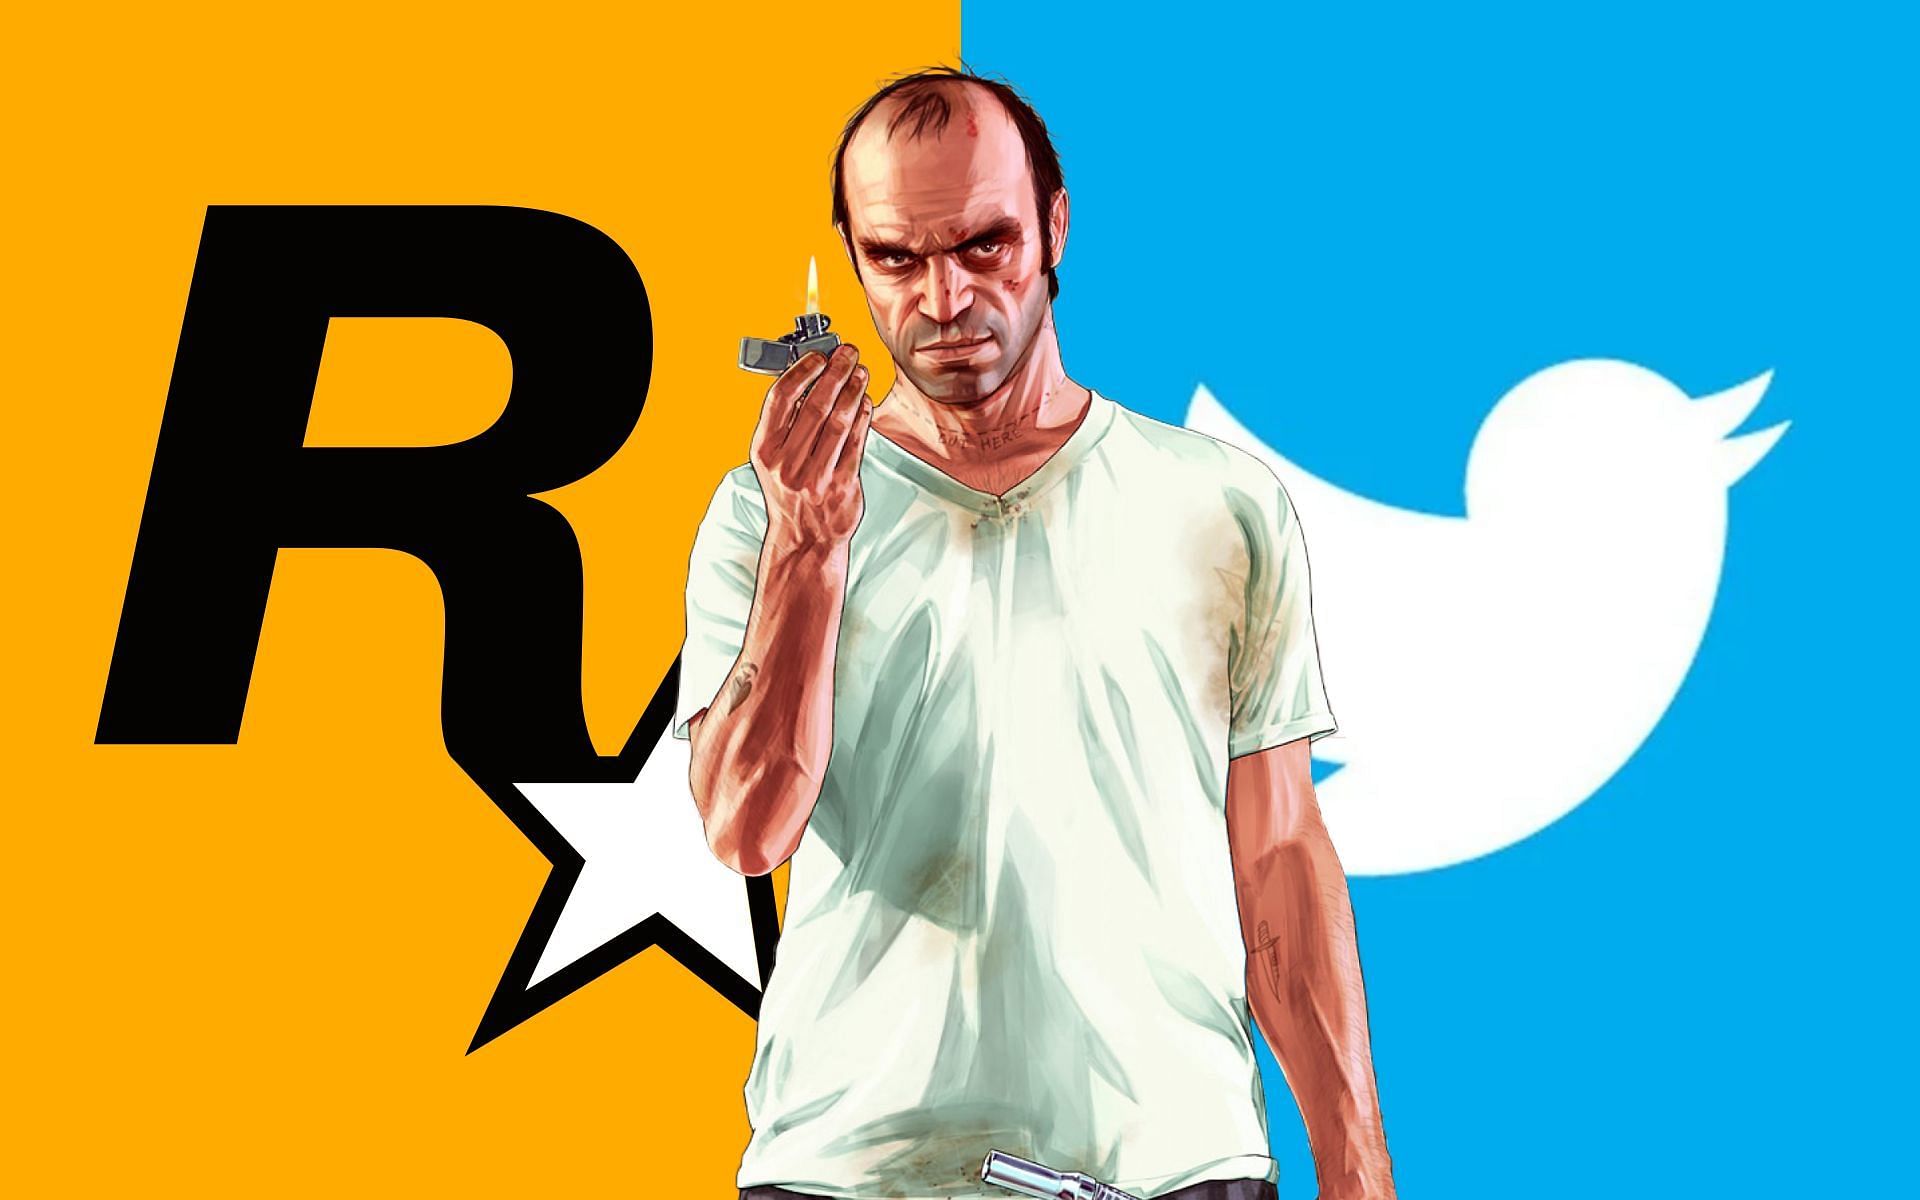 Gta 6 has set the record for being the most liked video game